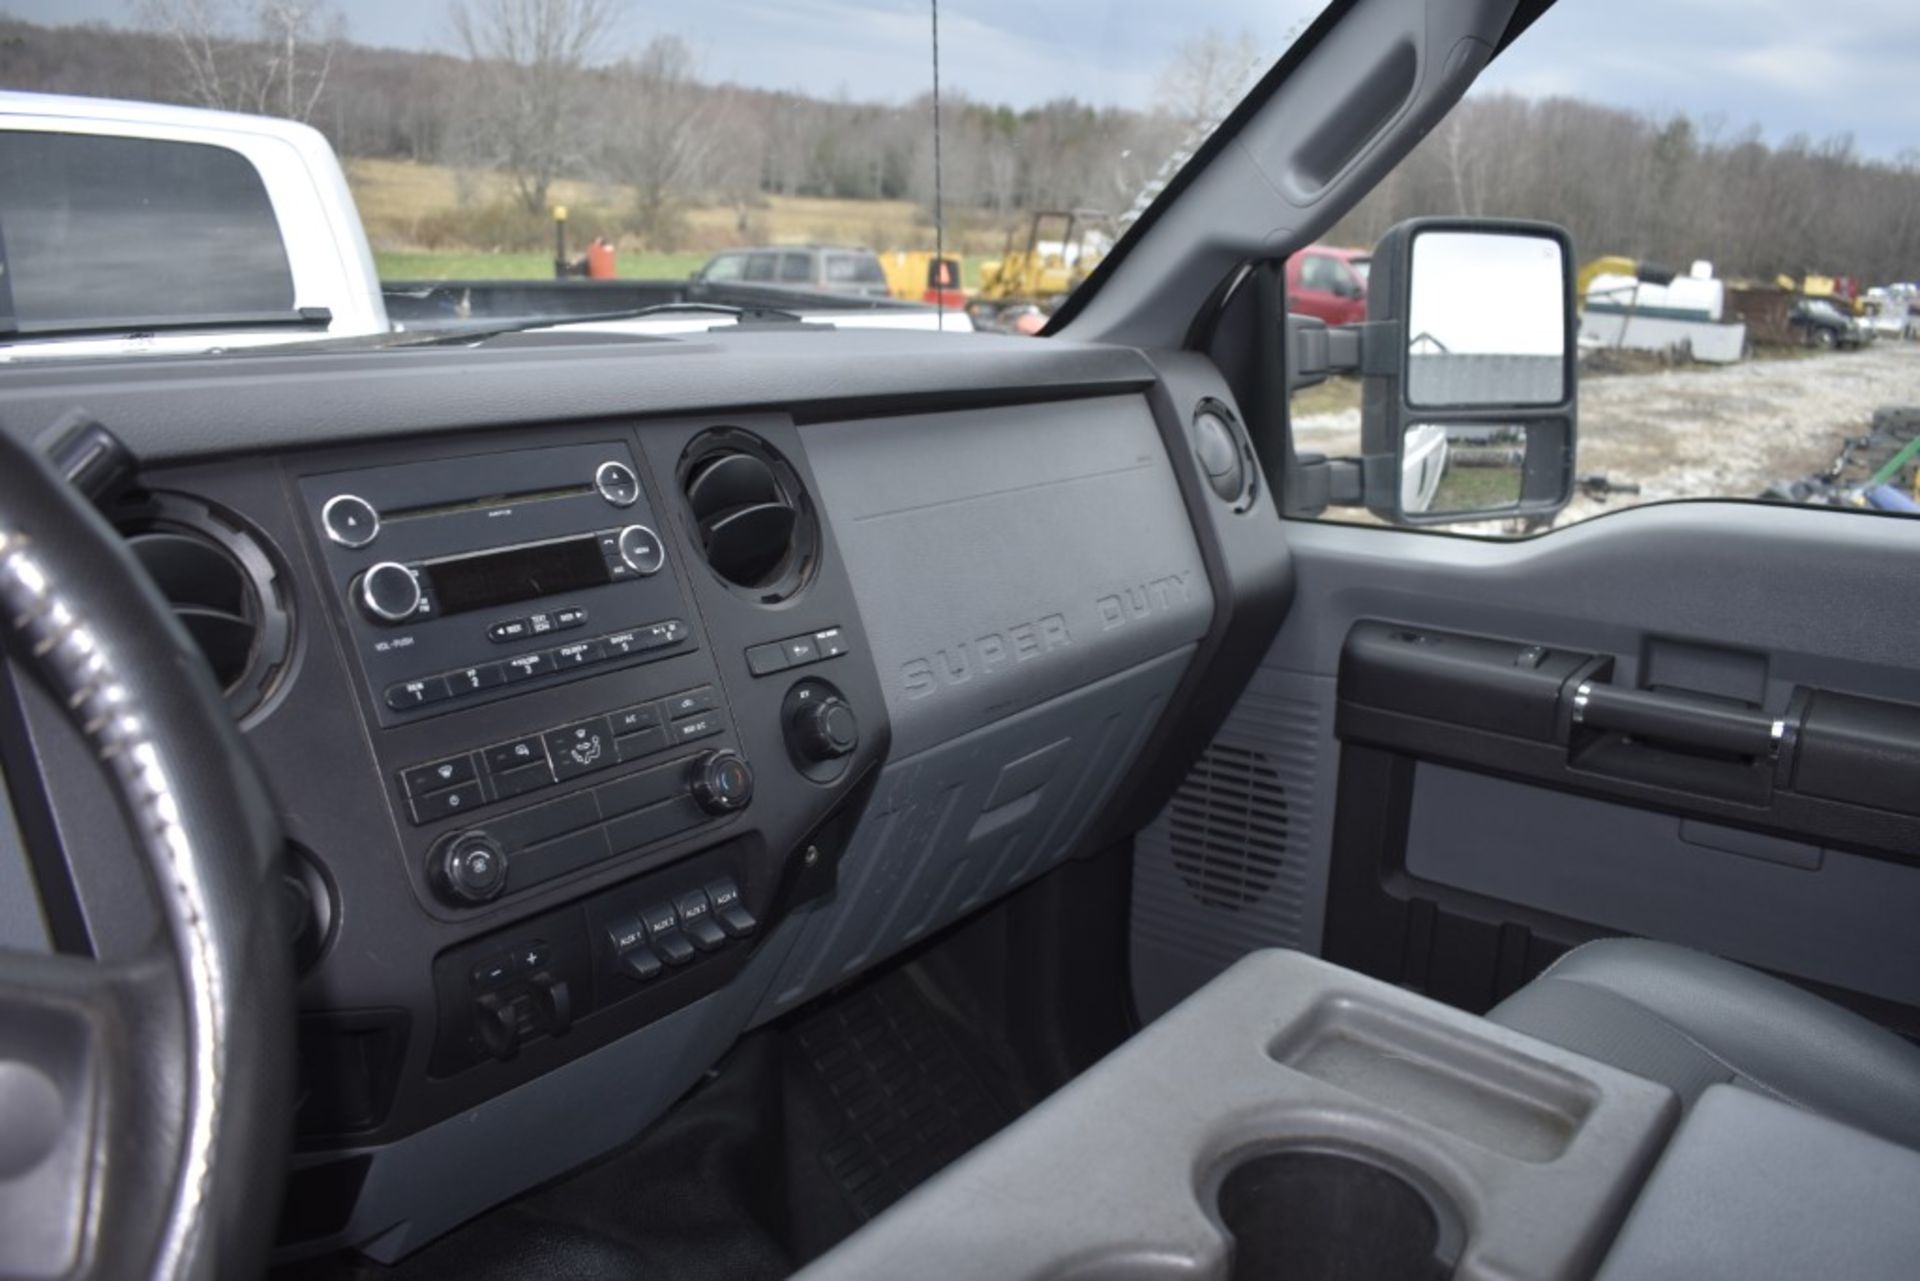 2011 Ford F-250 Super Duty Truck - Image 37 of 40